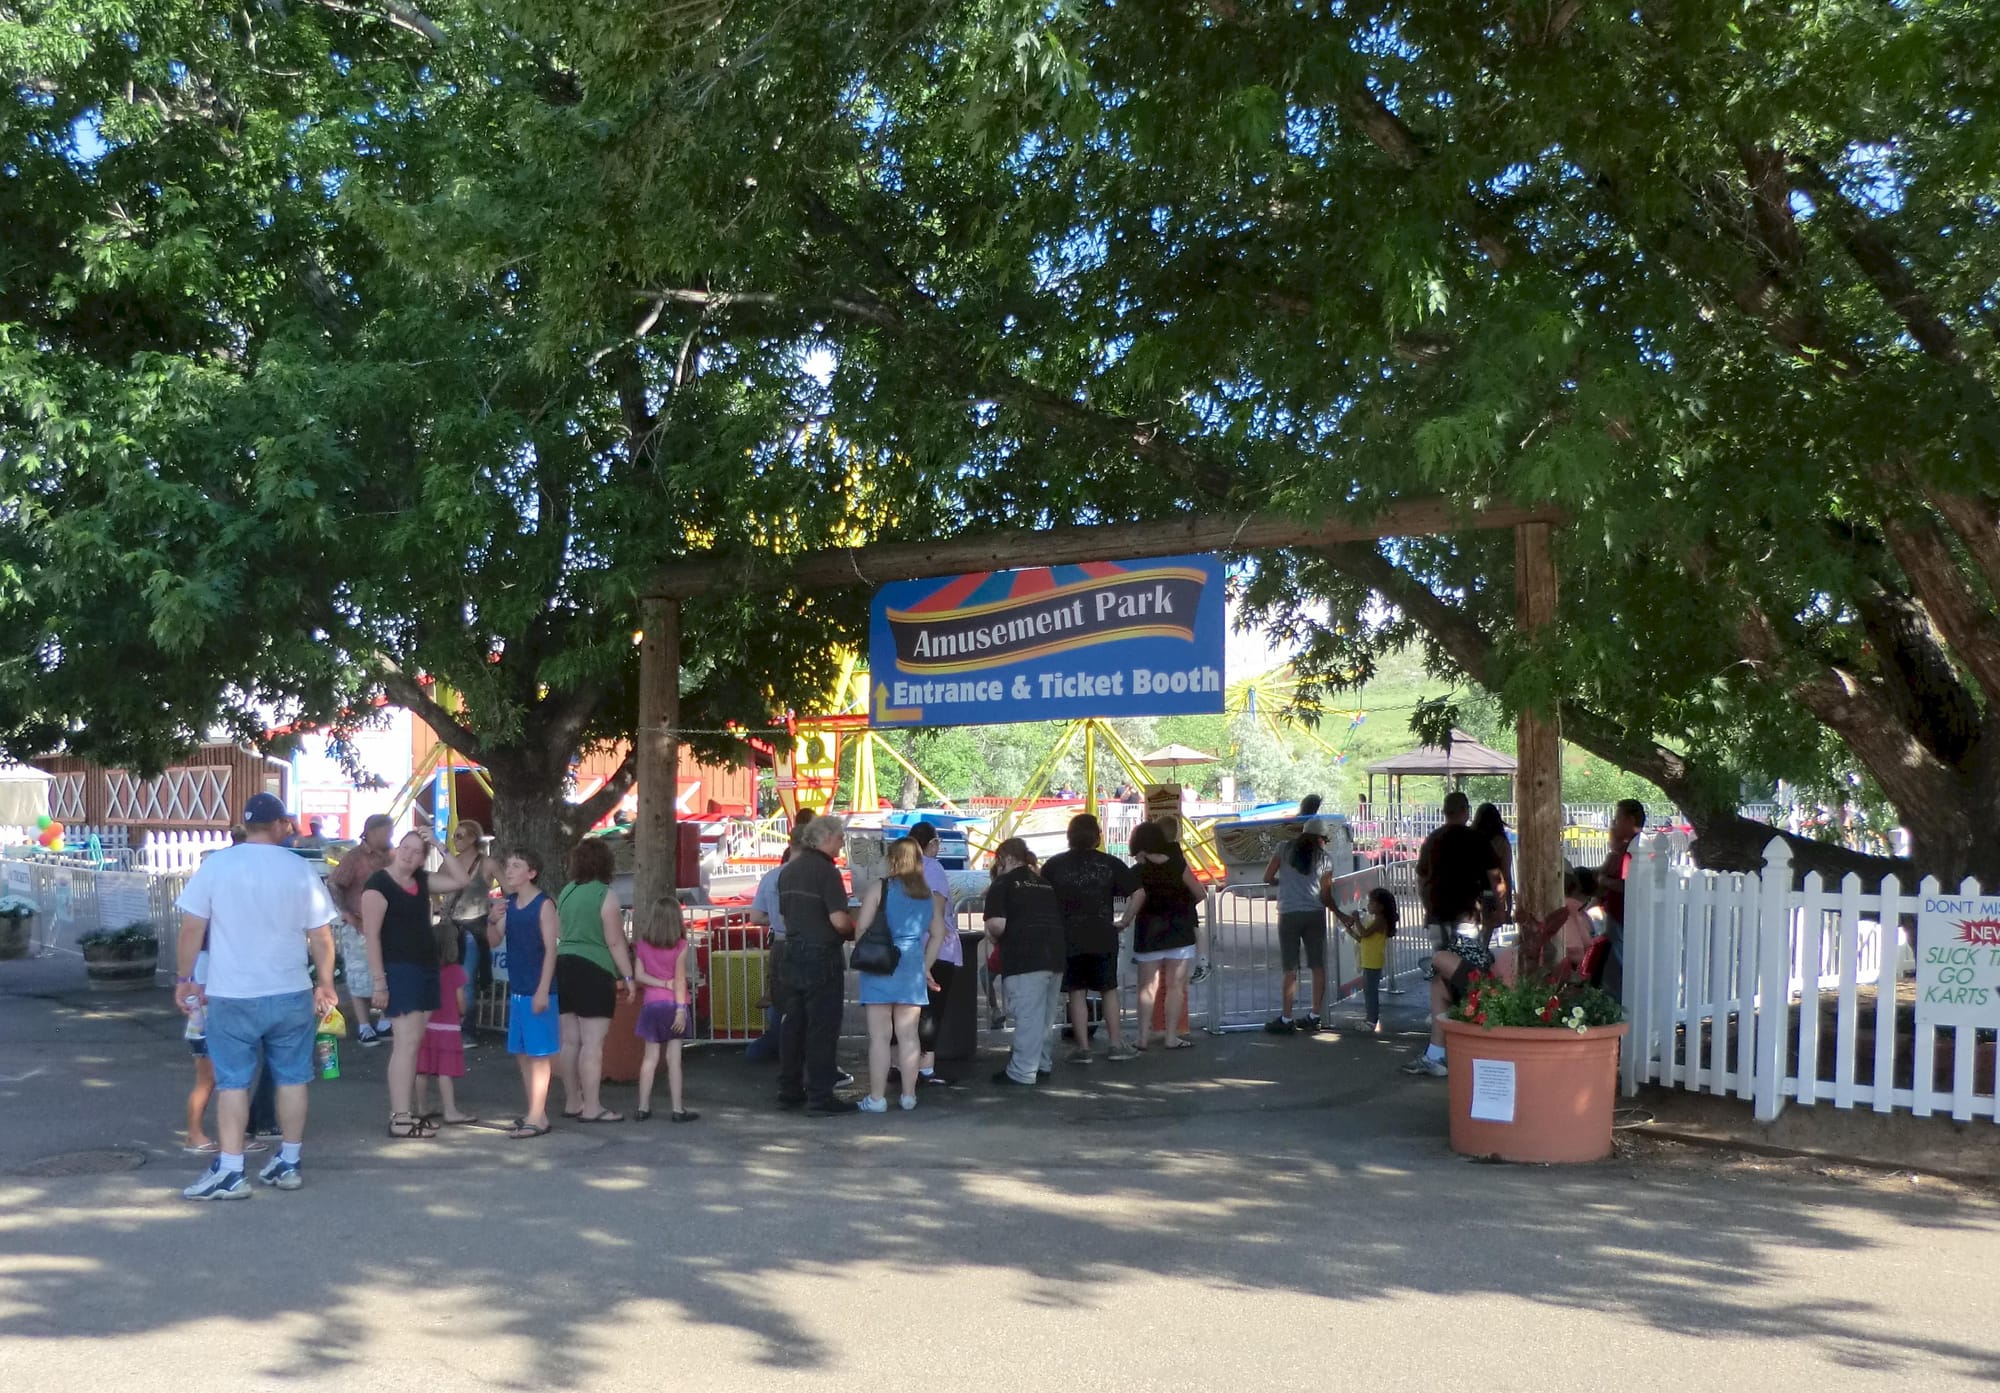 many people near an entrance gate to an area surrounded by a white picket fence - sign announces "Amusement Park"